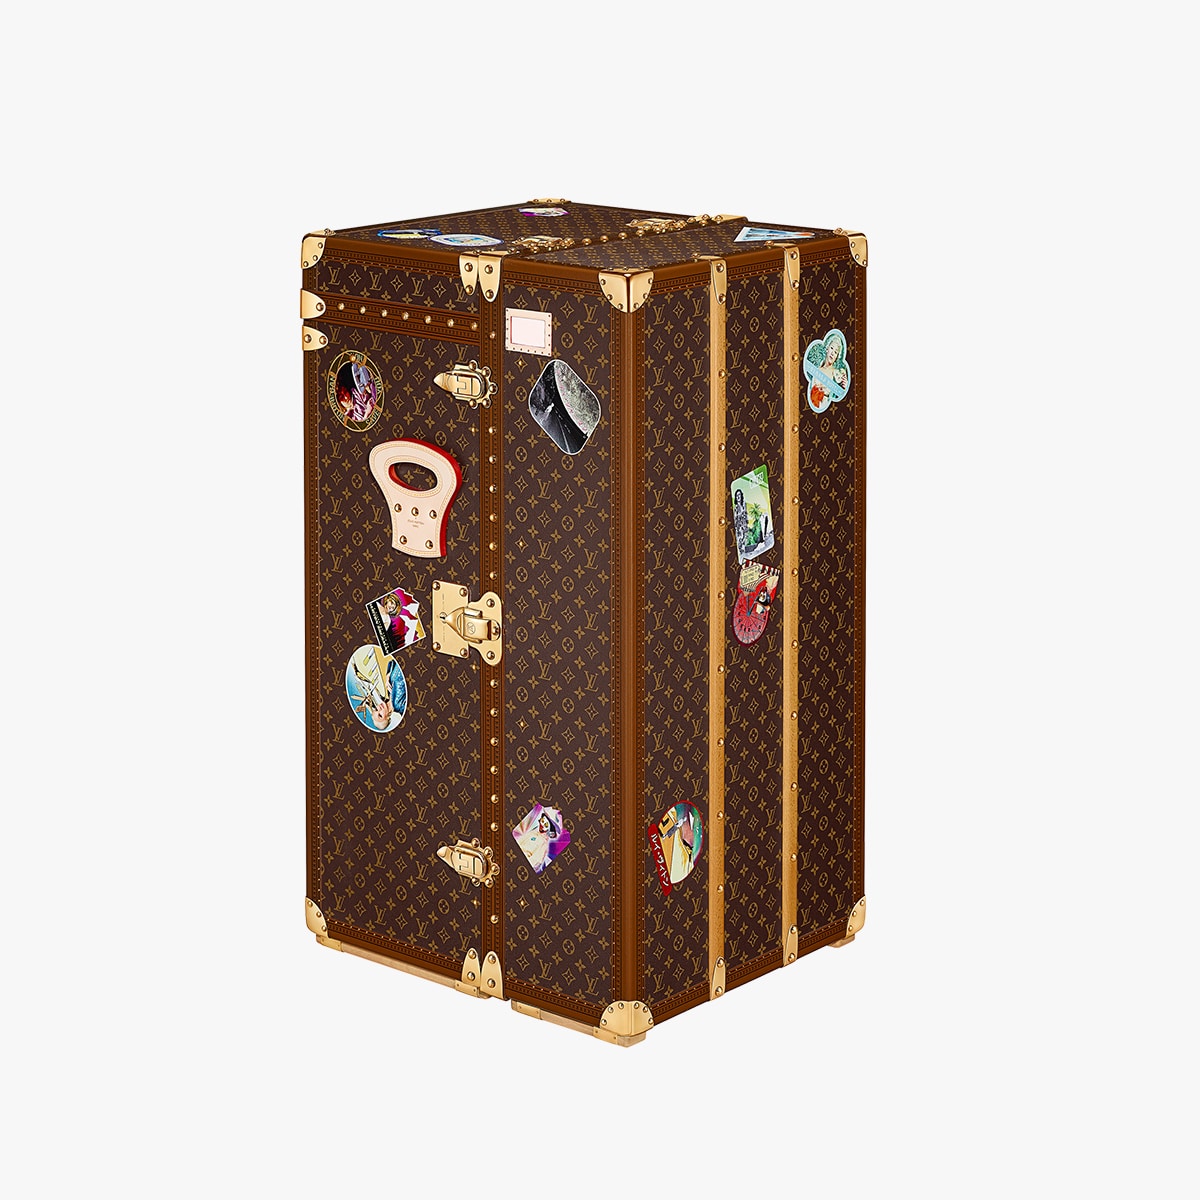 Louis Vuitton recruits 6 Iconoclasts to design travel and messenger bags  with their signature monogram - Luxurylaunches